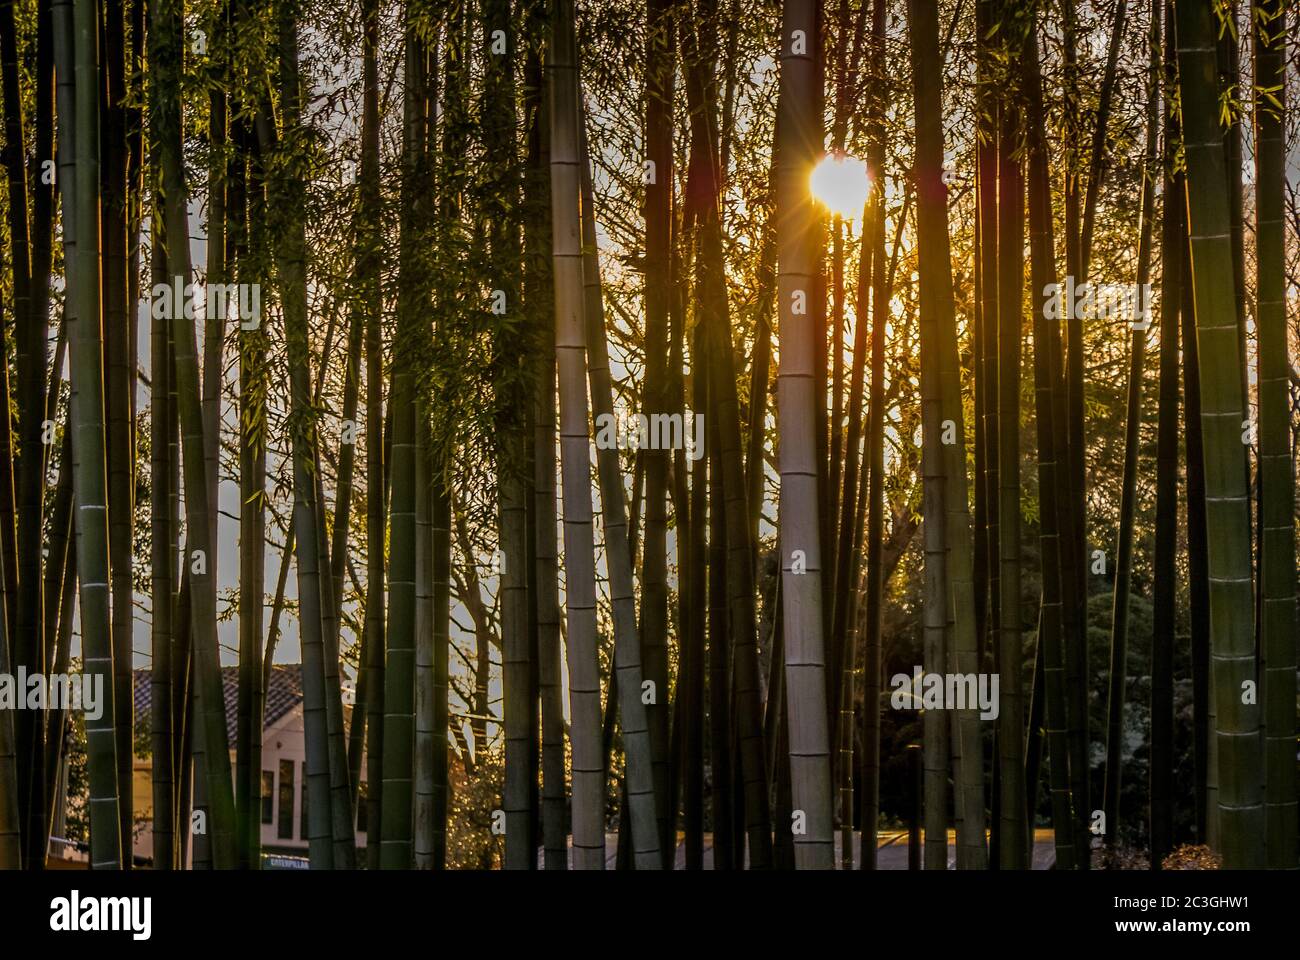 Bamboo forest of the image that was illuminated by the setting sun Stock Photo